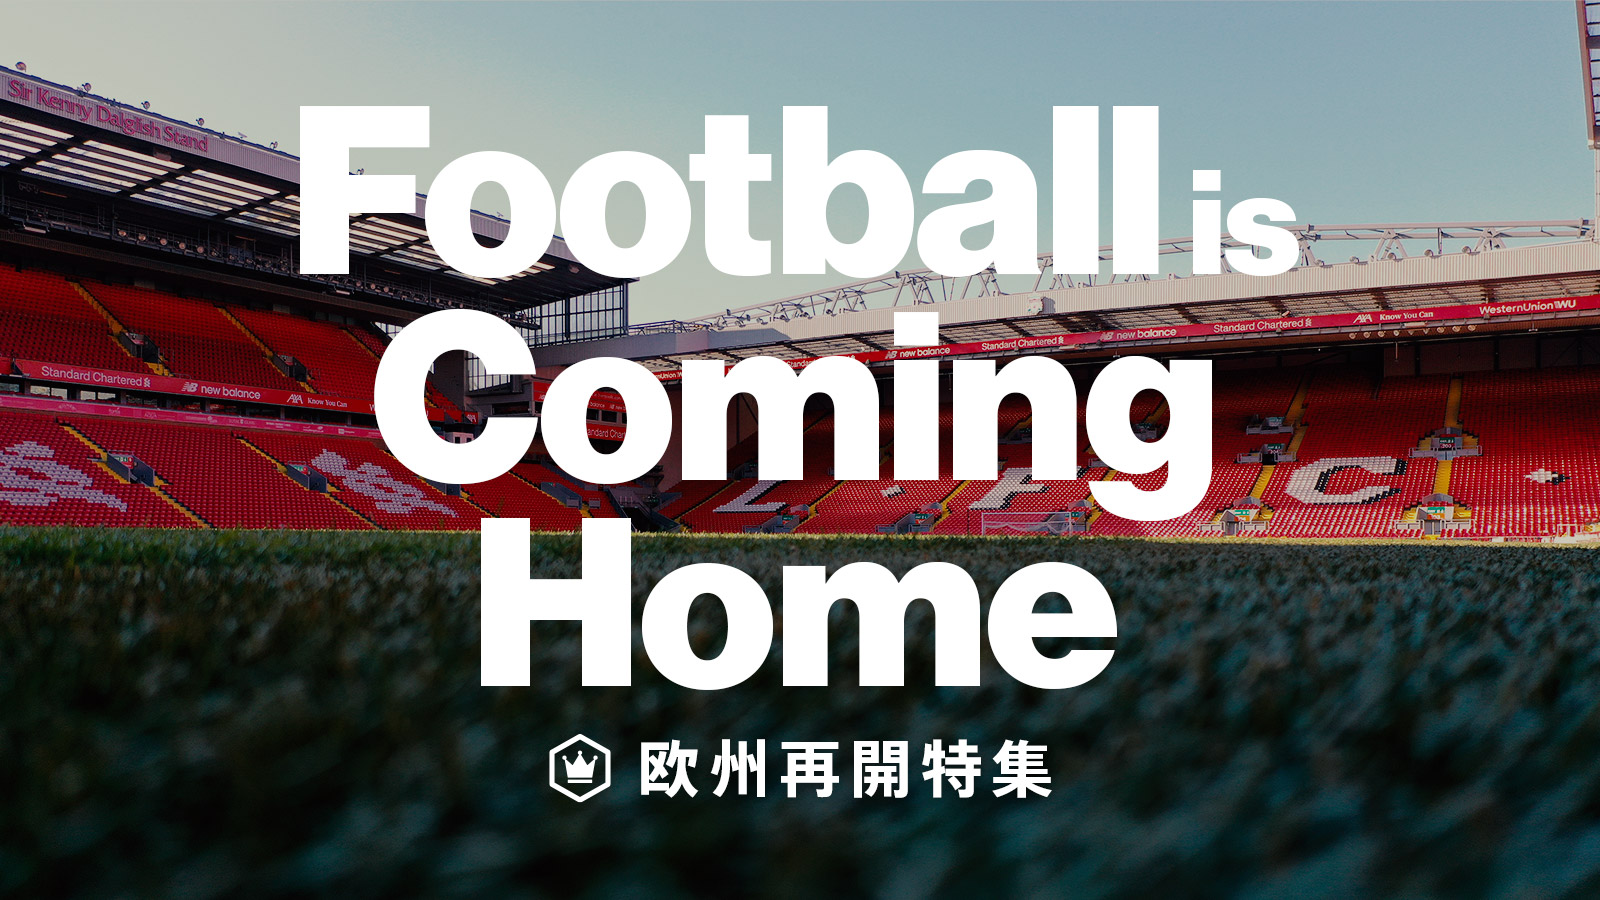 Football Is Coming Home 欧州再開特集 サッカーキング